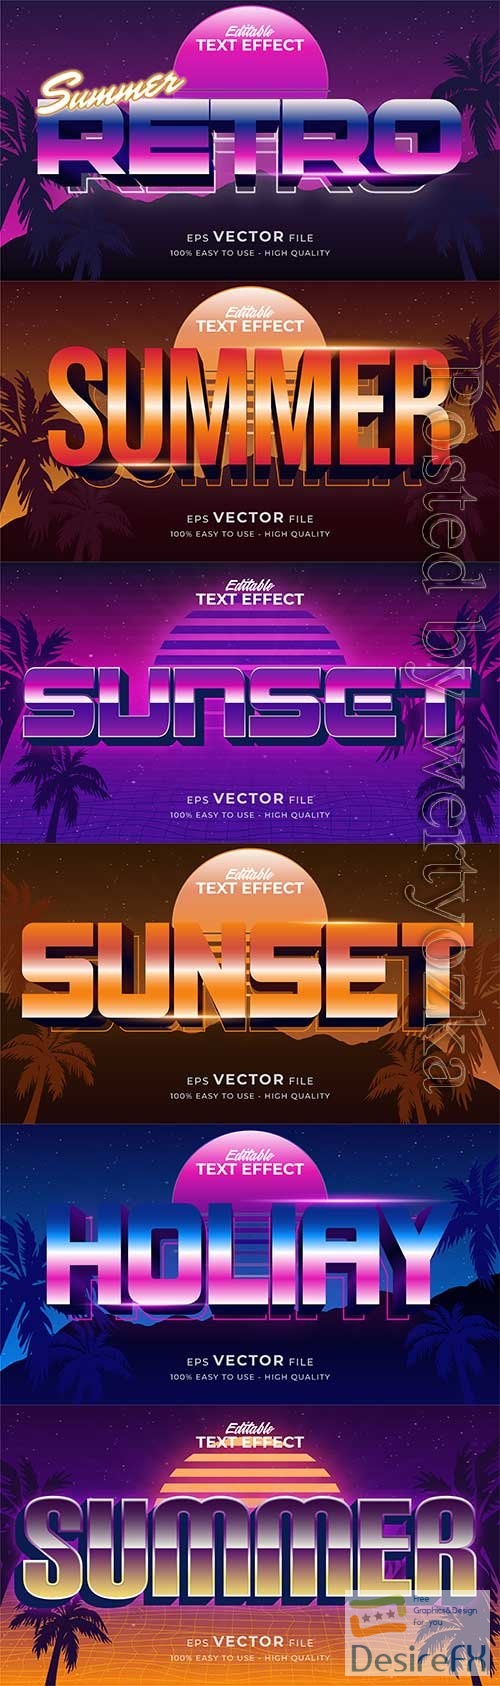 Retro summer holiday text in grunge style theme in vector vol 16